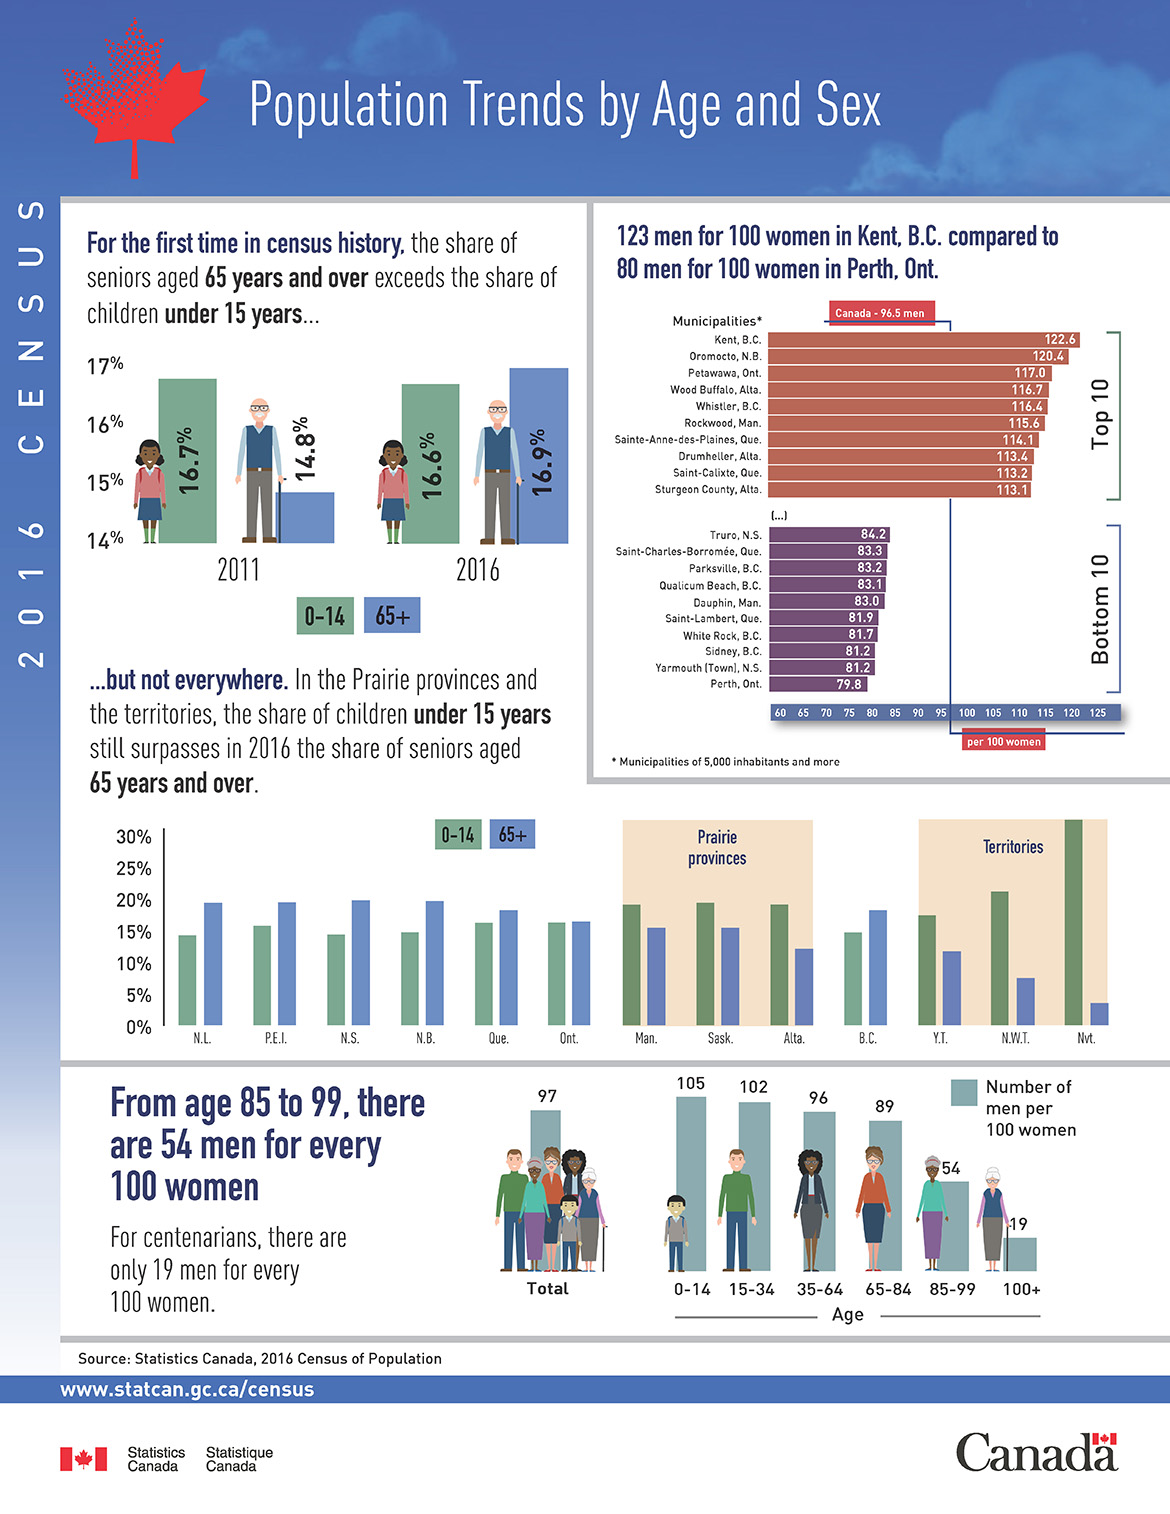 Infographic: Population Trends by Age and Sex, 2016 Census of Population